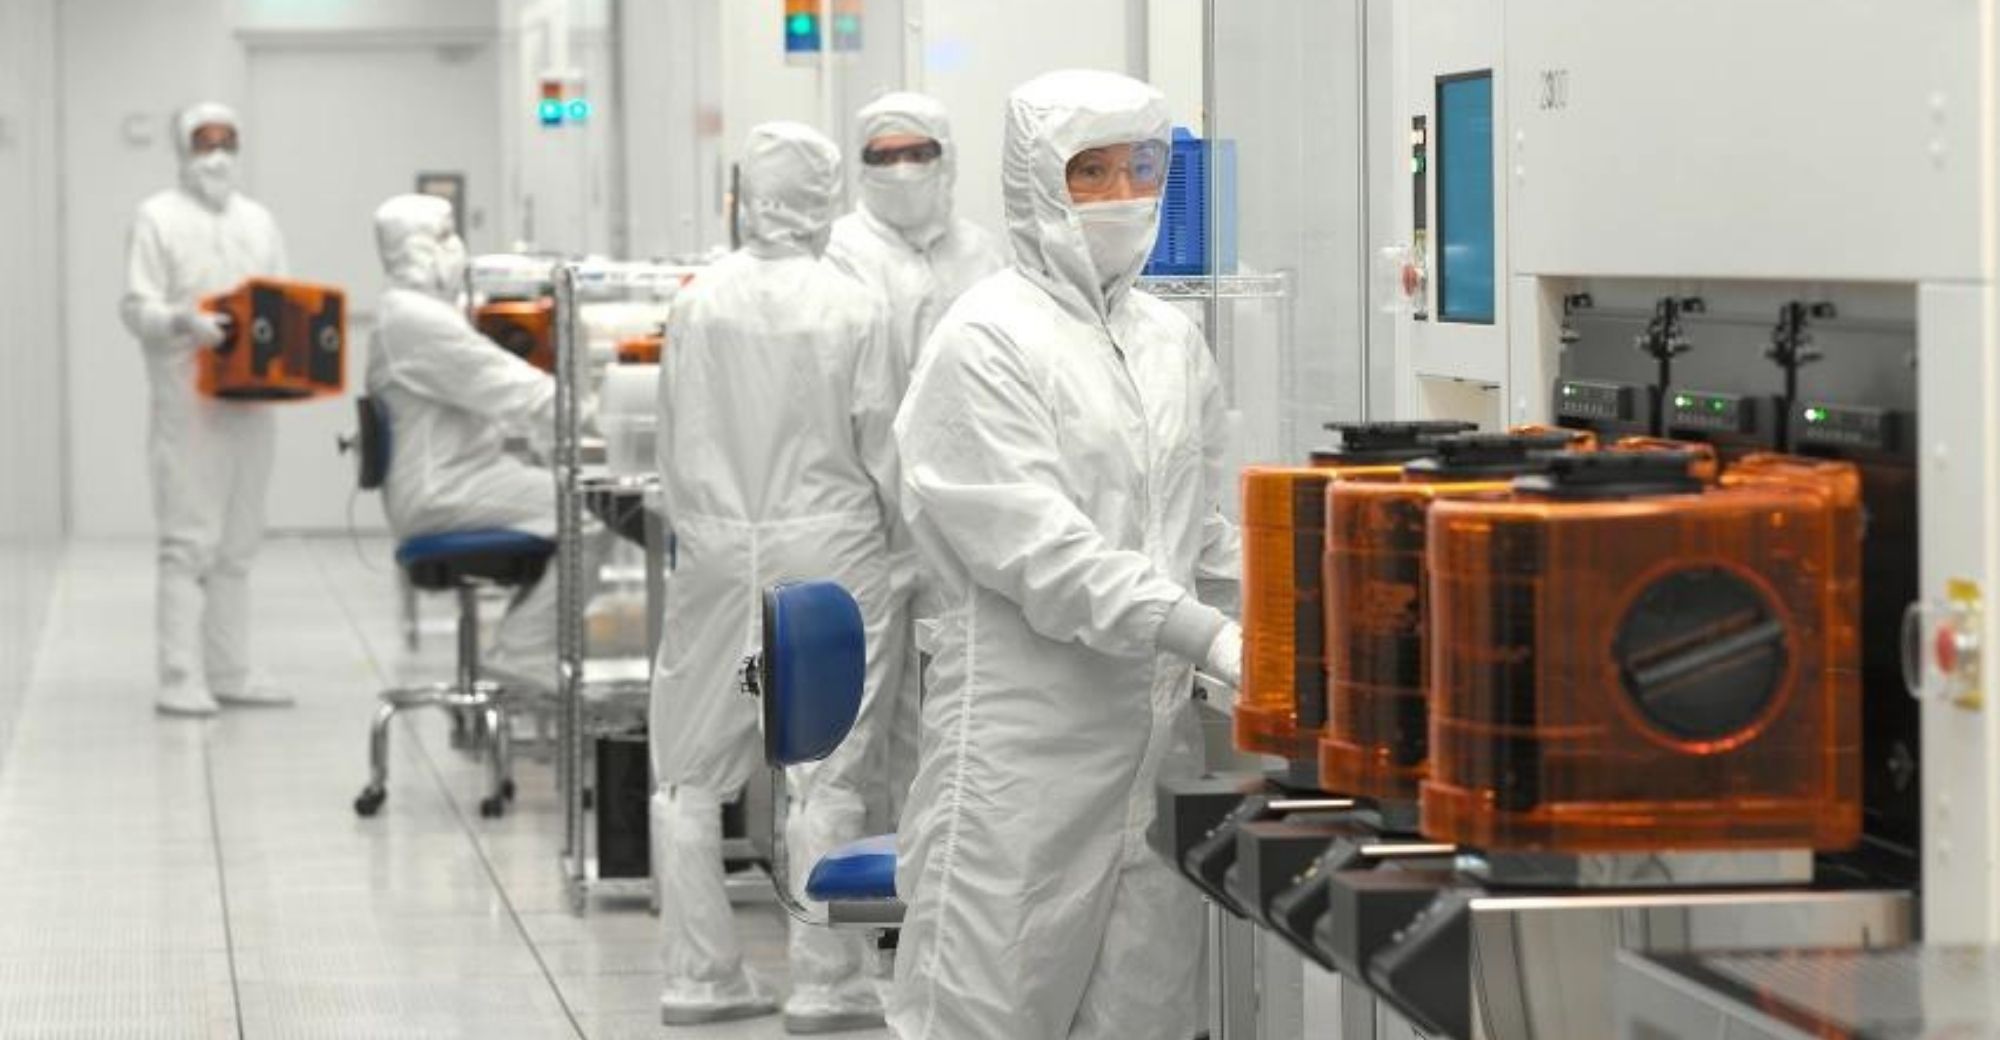 US Chip Equipment Firm Lam Research Starts Layoffs in China